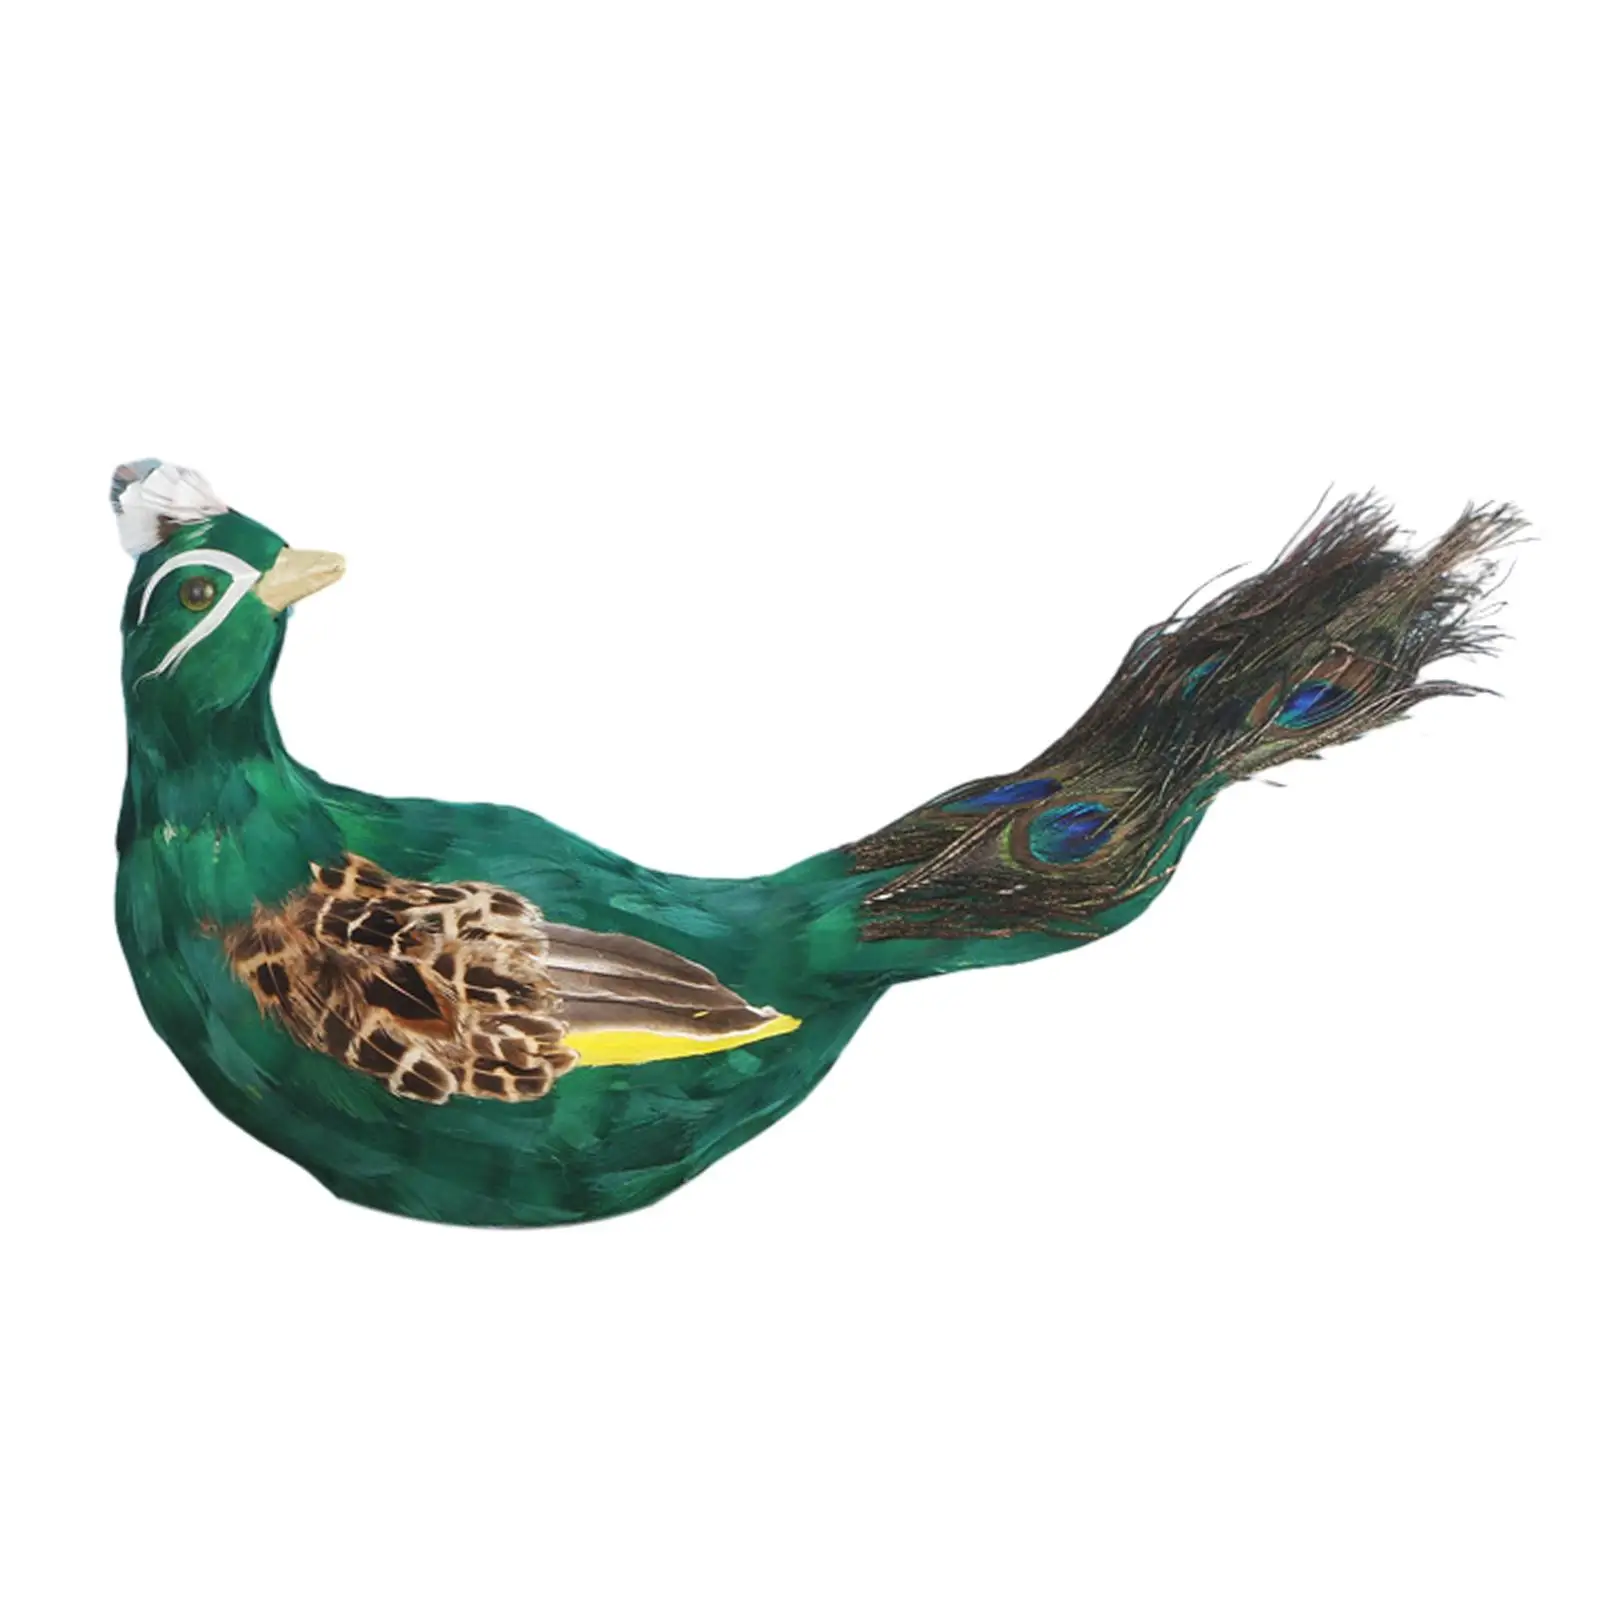 Simulation Peacock Decoration Artificial Birds Decor Figurine Scene Layout Artificial Peacock Ornament for Home Living Room Yard